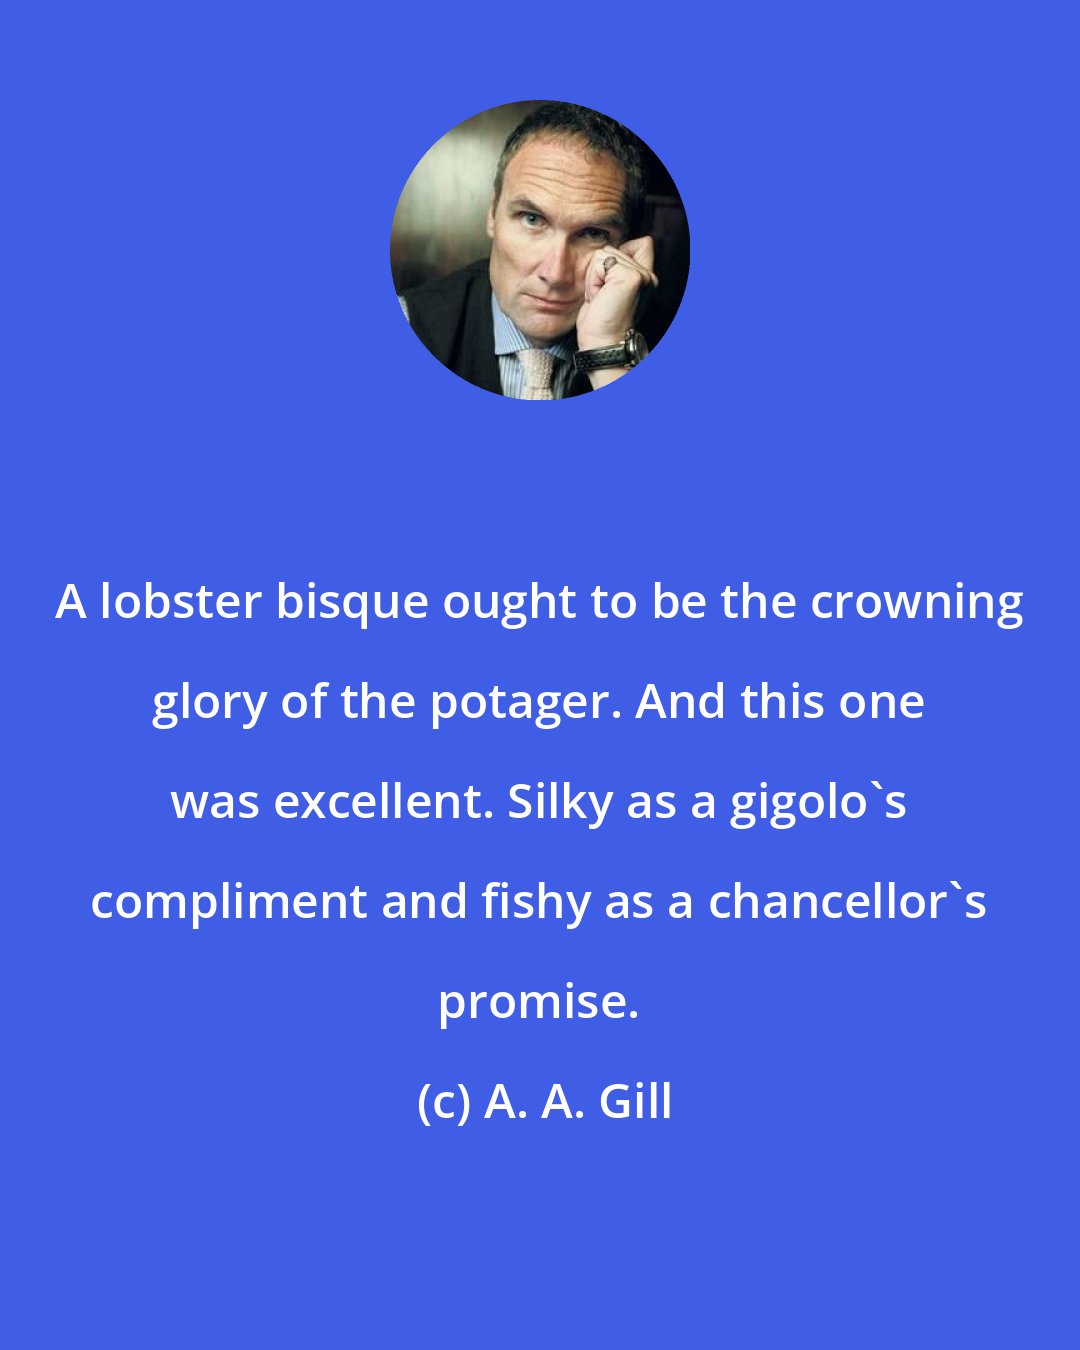 A. A. Gill: A lobster bisque ought to be the crowning glory of the potager. And this one was excellent. Silky as a gigolo's compliment and fishy as a chancellor's promise.